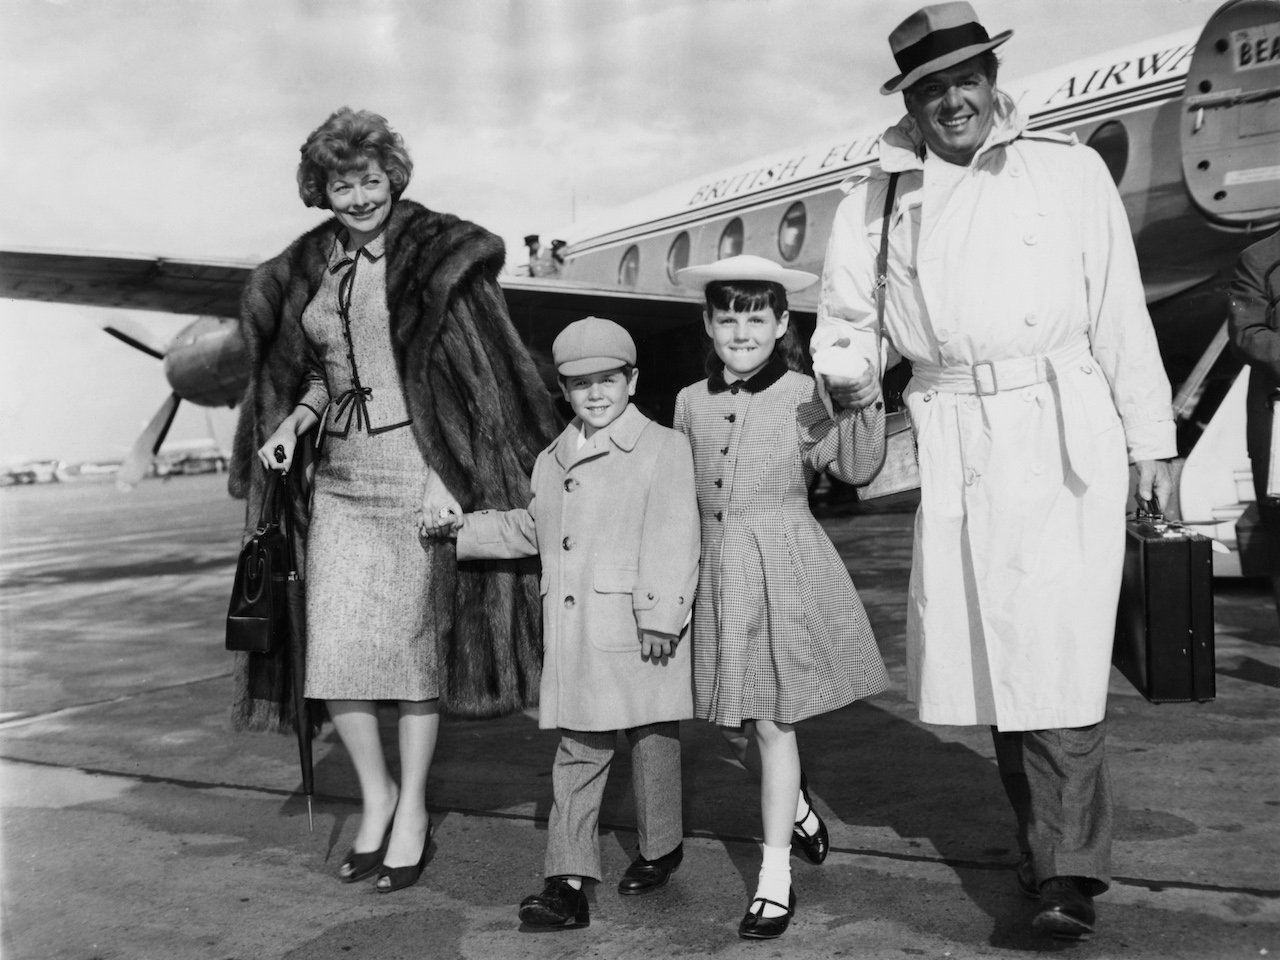 Lucille Ball and her husband Desi Arnaz arrive at London Airport with their children Lucie and Desi Jr.